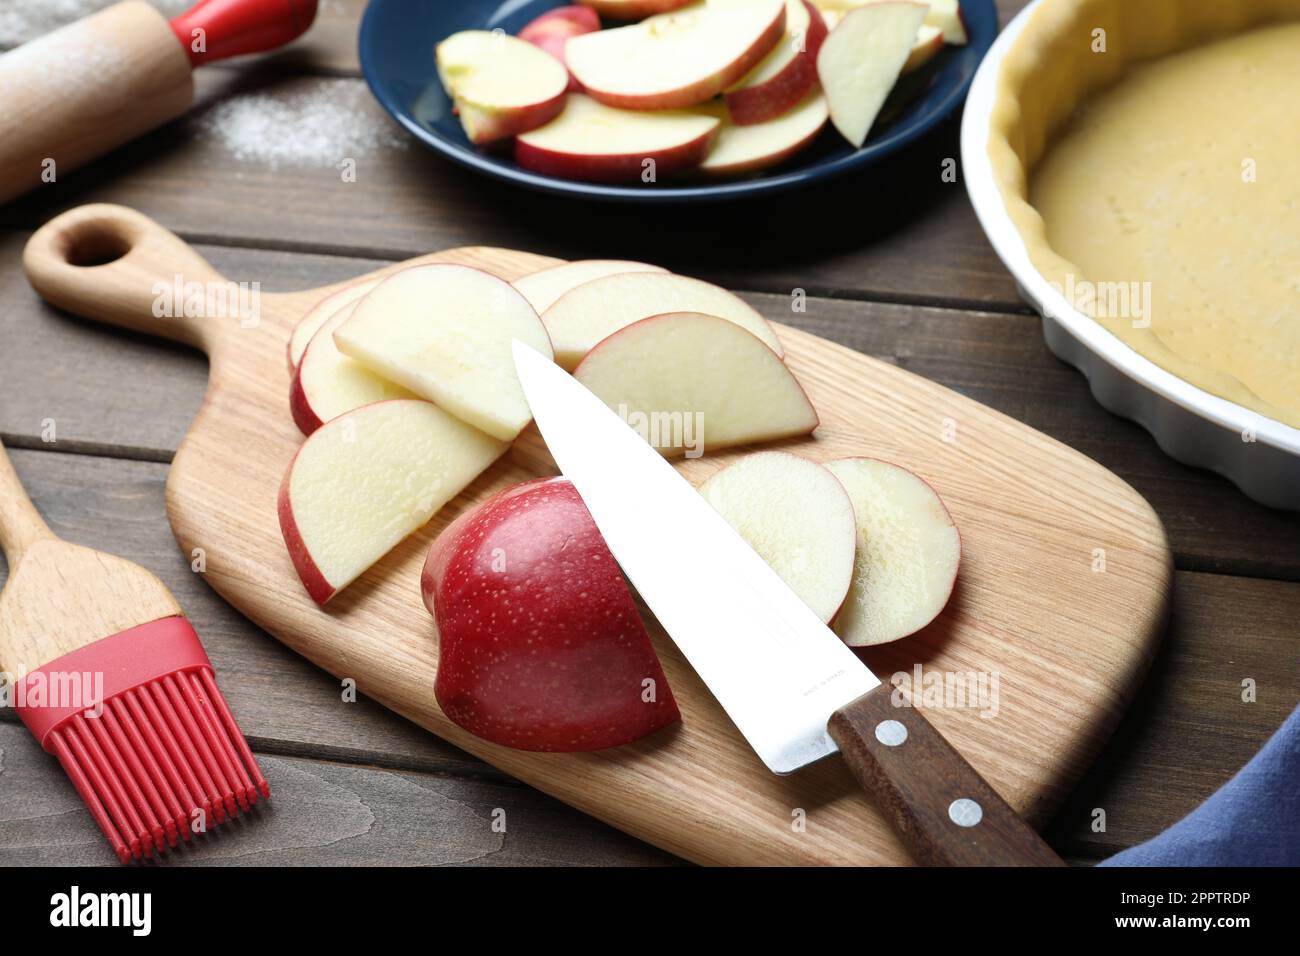 Cut fresh apple with knife and board on wooden table. Baking pie Stock Photo